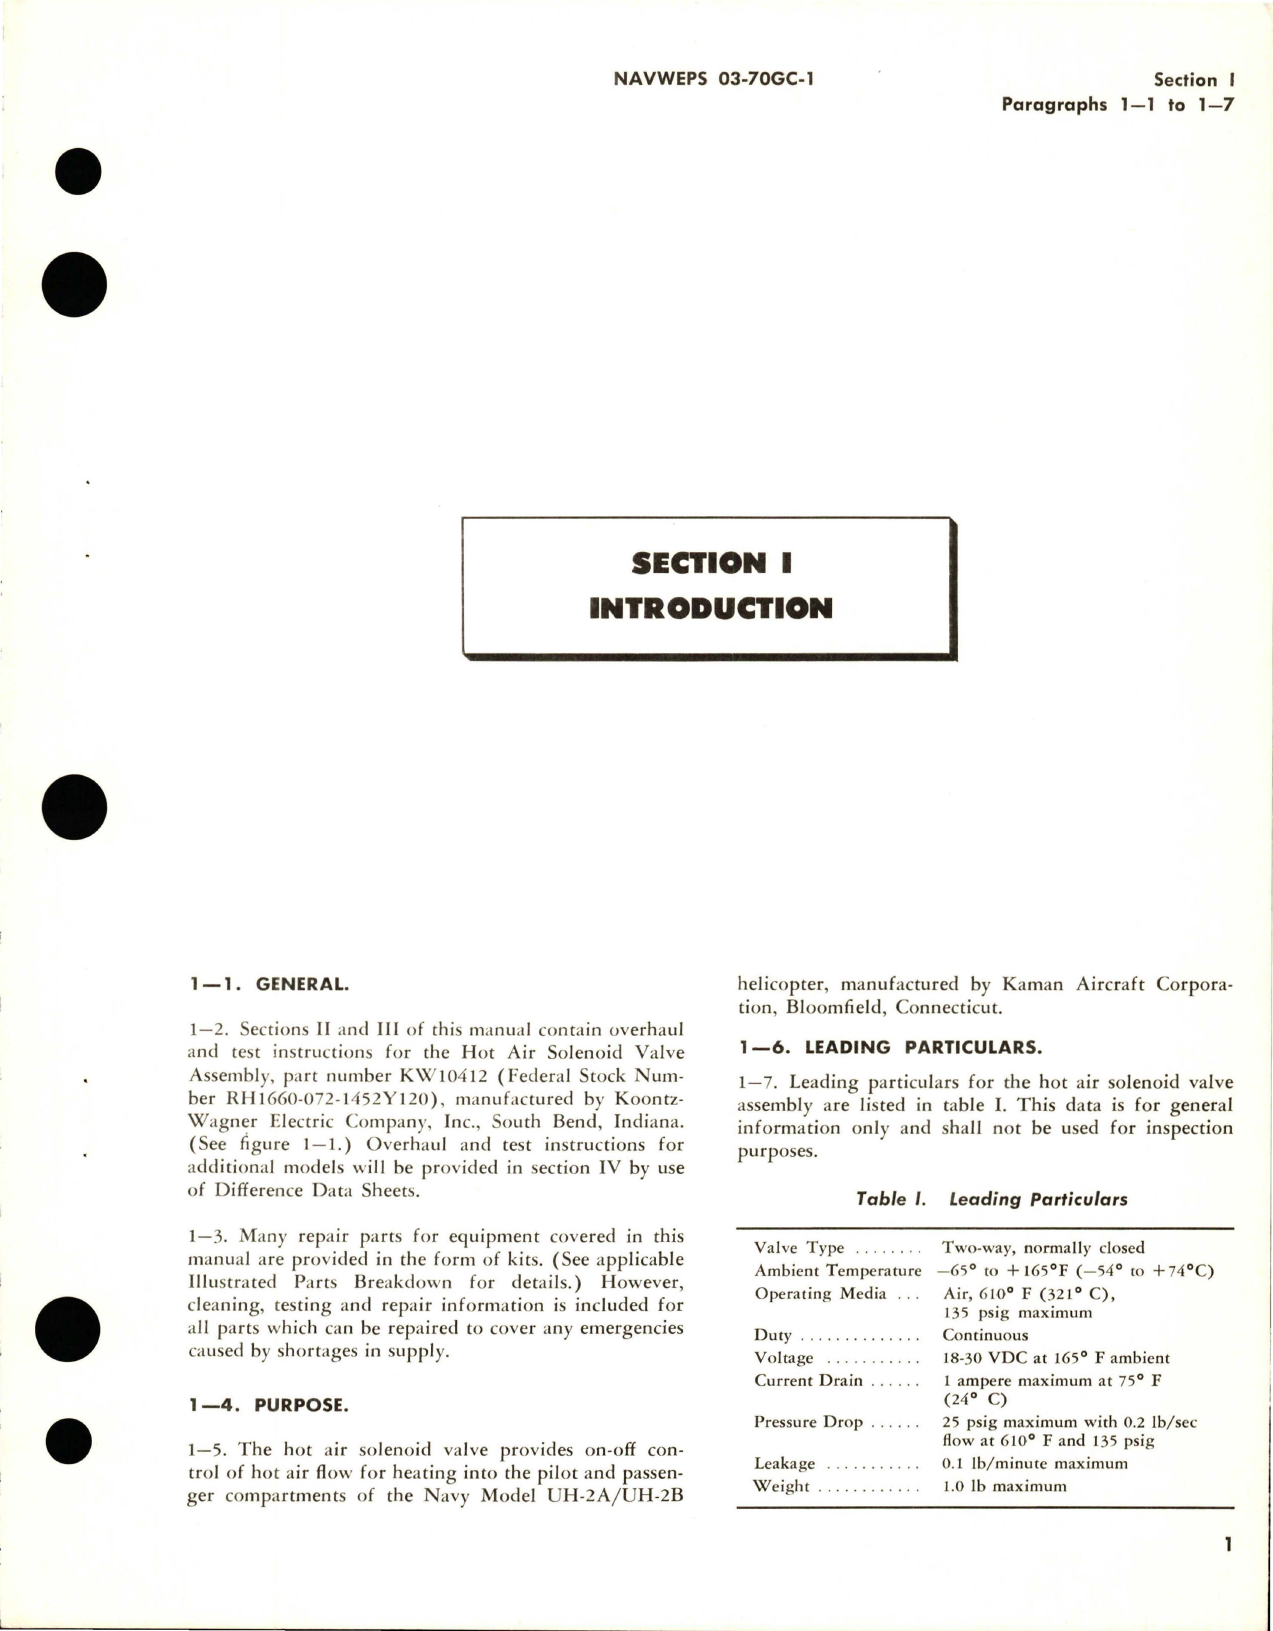 Sample page 5 from AirCorps Library document: Overhaul Instructions for Hot Air Solenoid Valve Assembly - Part KW10412